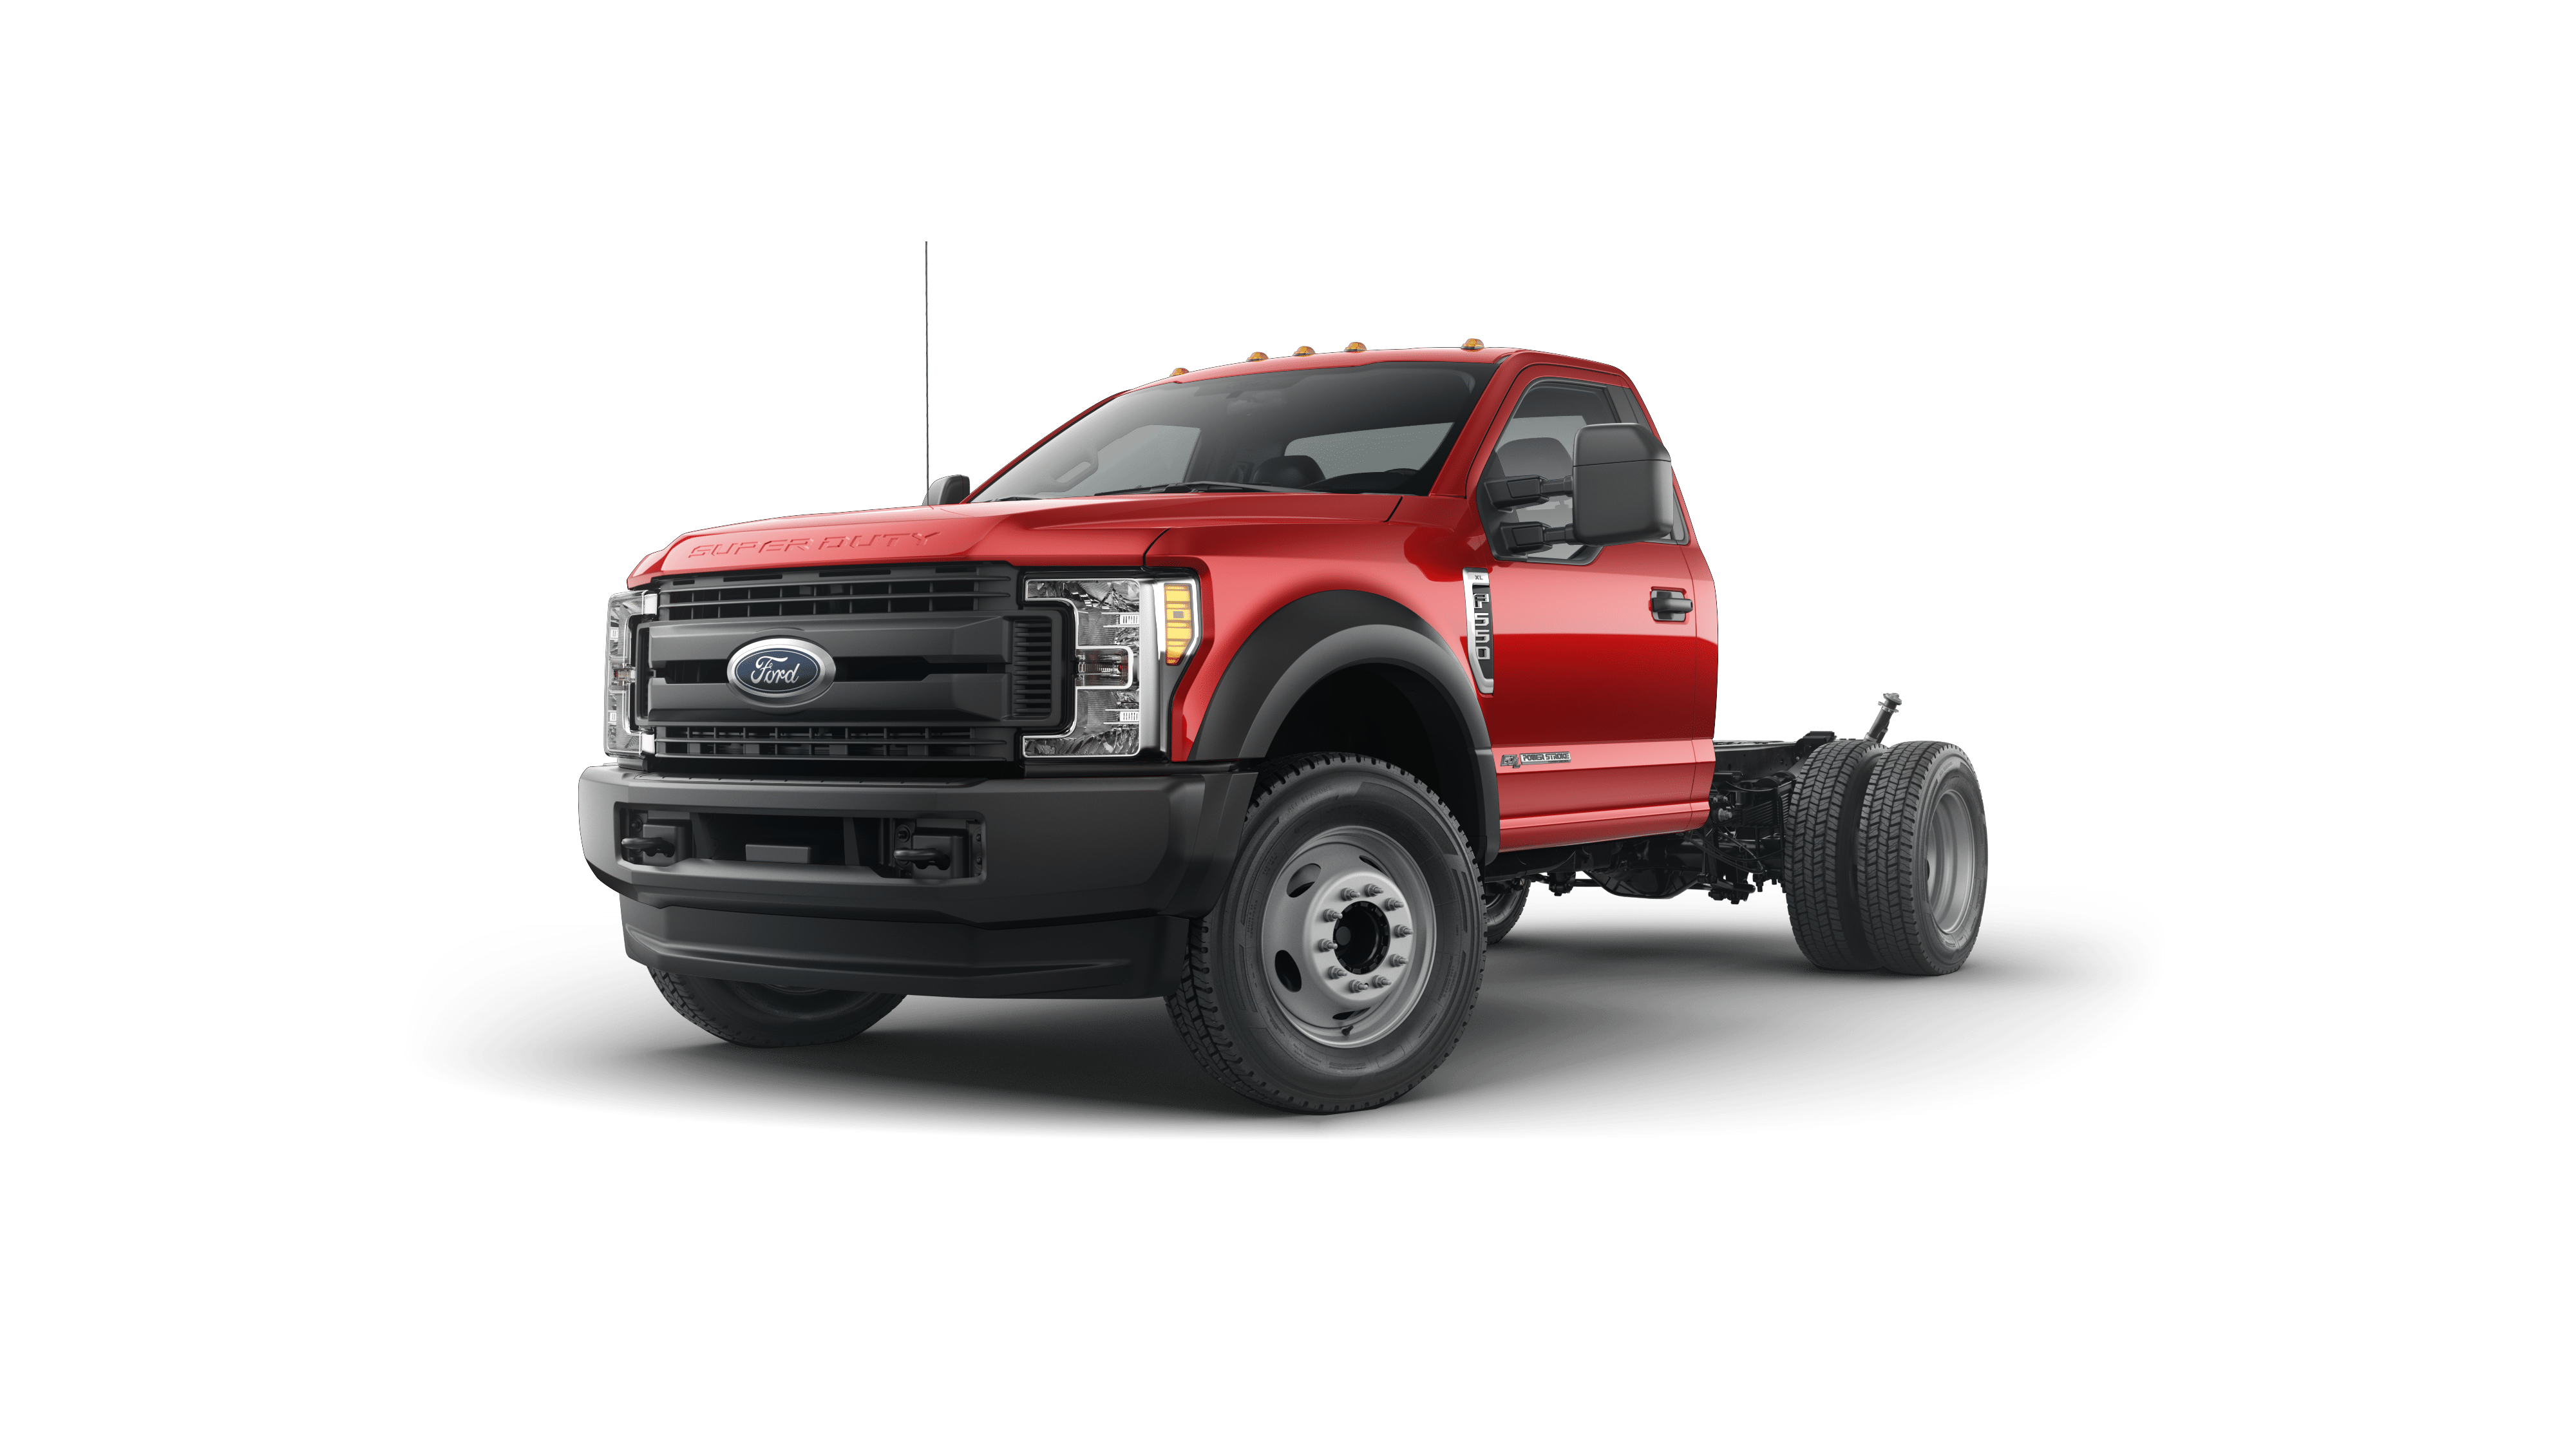 2019 Ford Super Duty F-550 DRW for sale in Neenah - 1FDUF5HT5KEE92036 2019 Ford Super Duty Drw F53